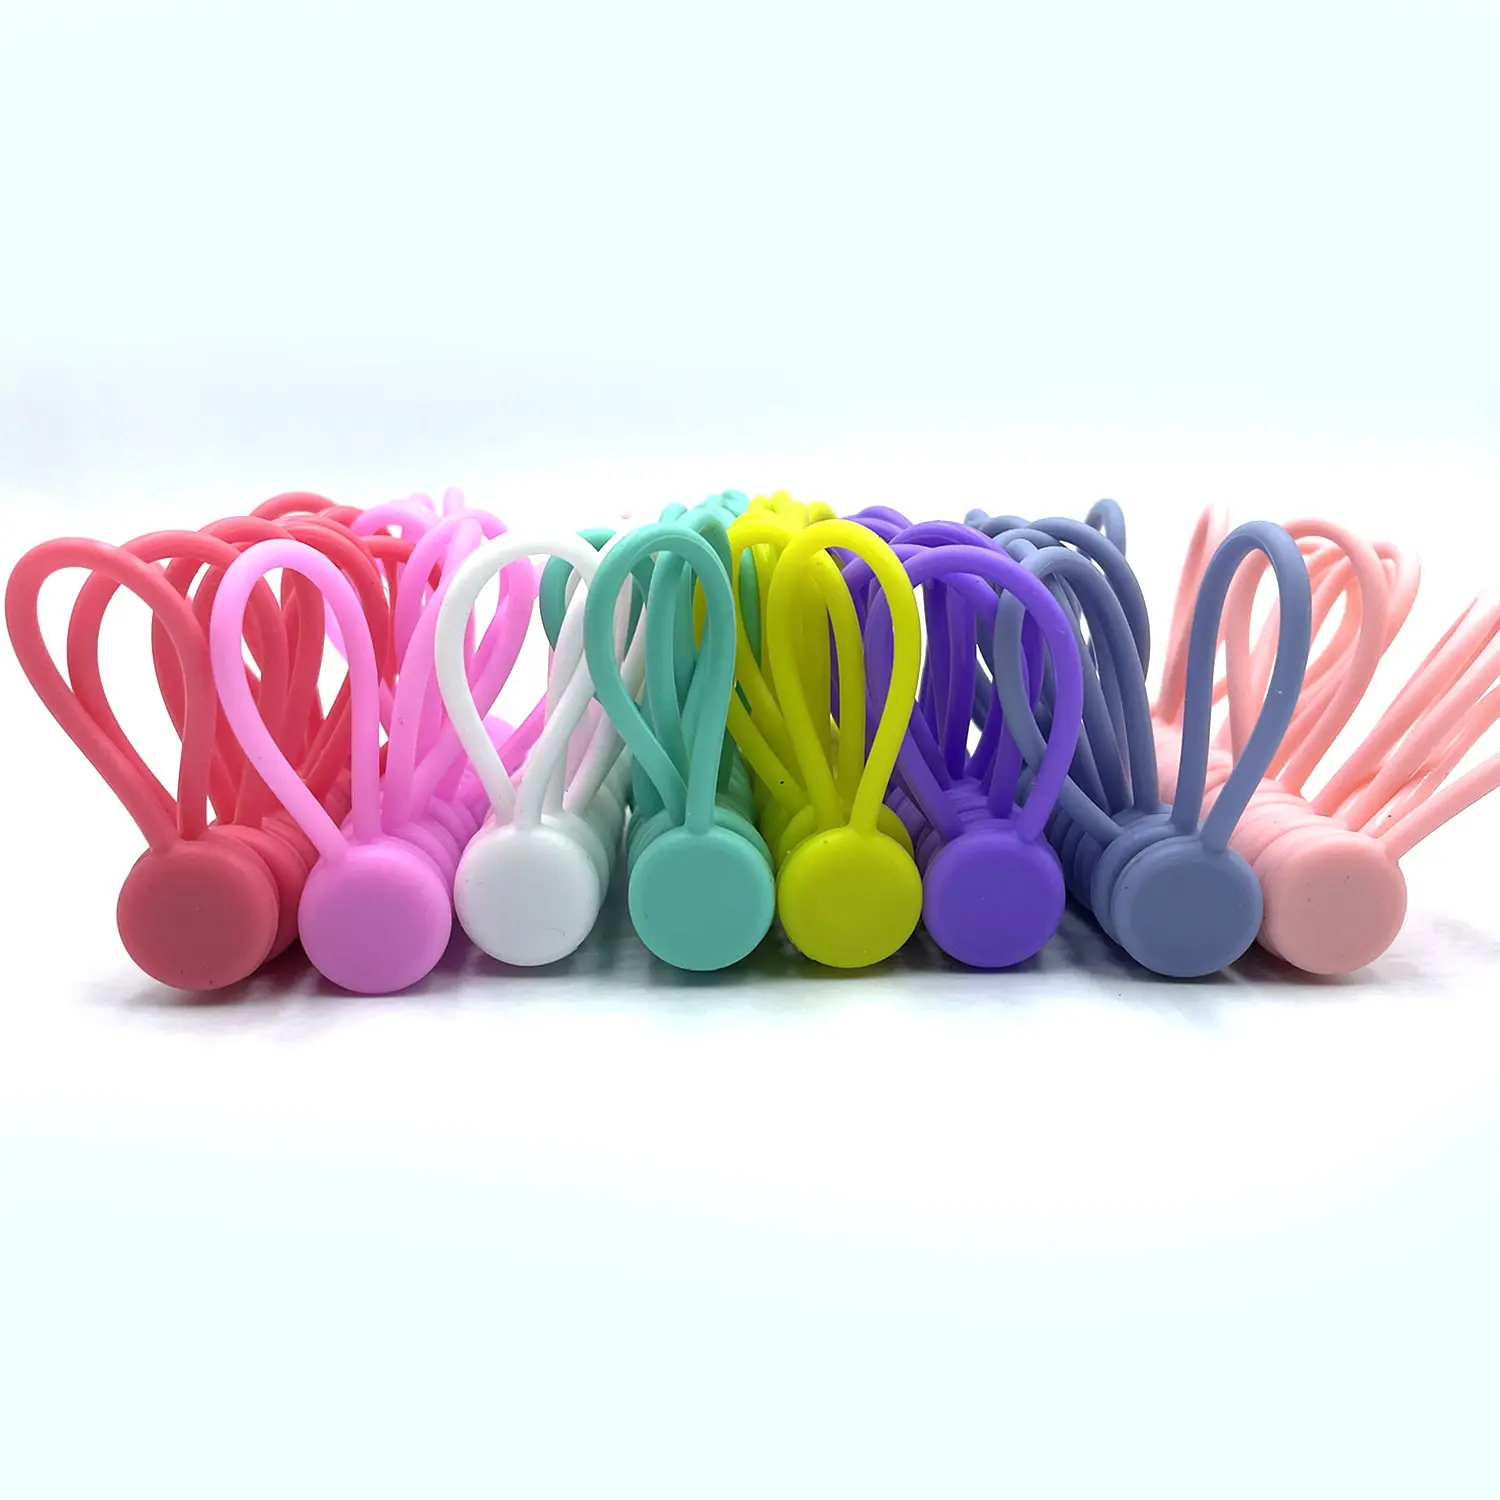 11cm Reusable Silicone Strong Magnetic Cable Ties/Twist Ties for Bundling and Organizing Cables/Cords